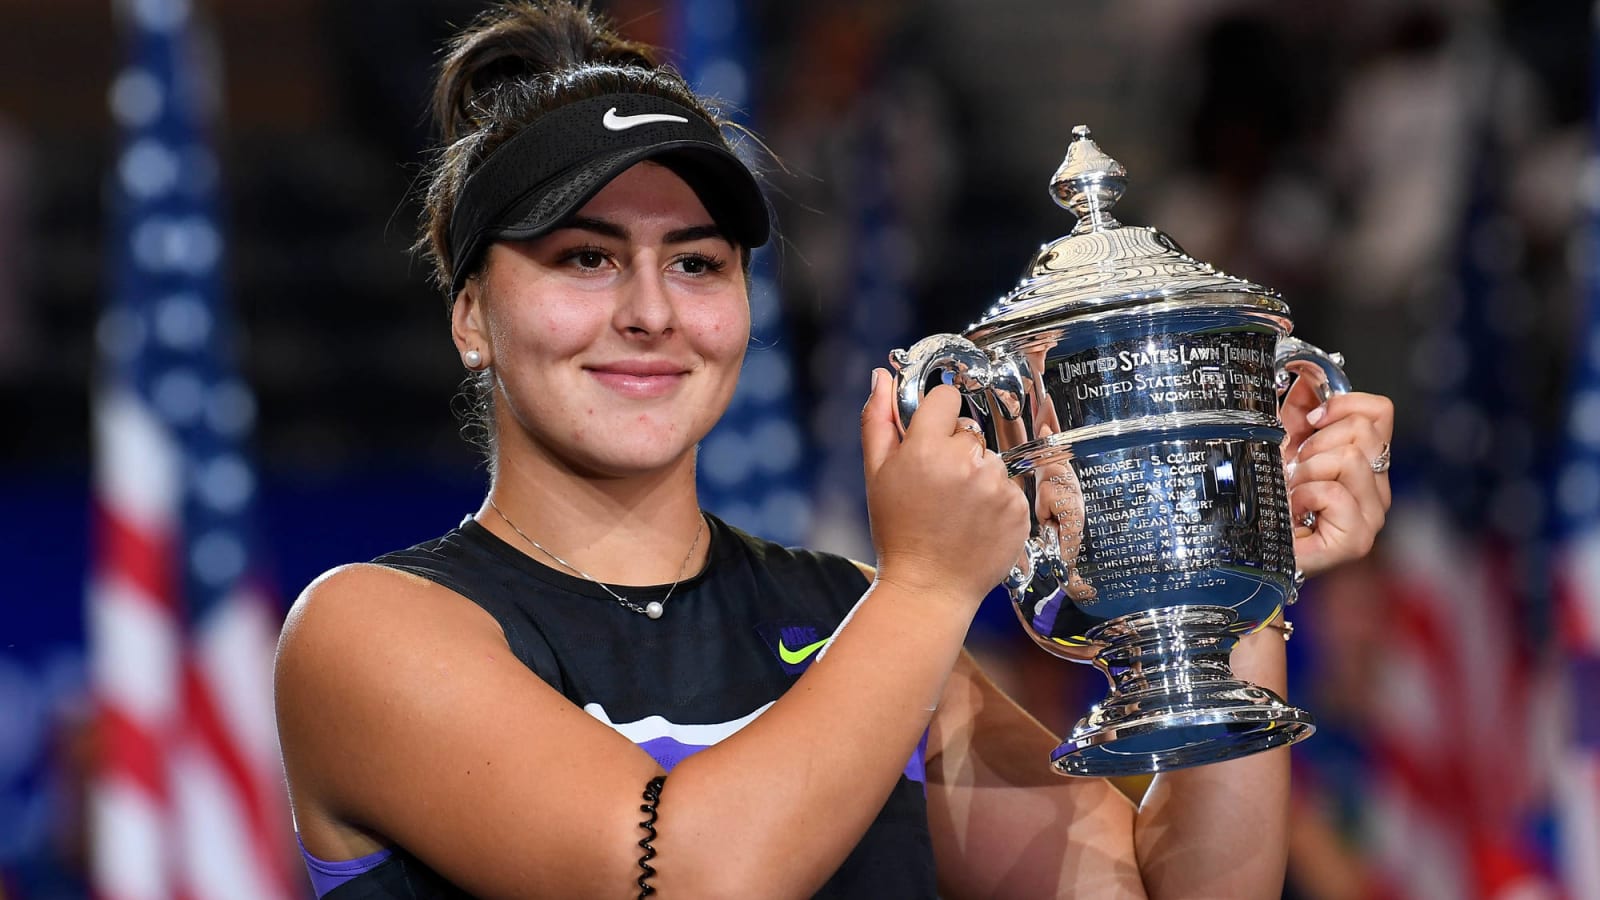 Andreescu won't play in French Open, rest of 2020